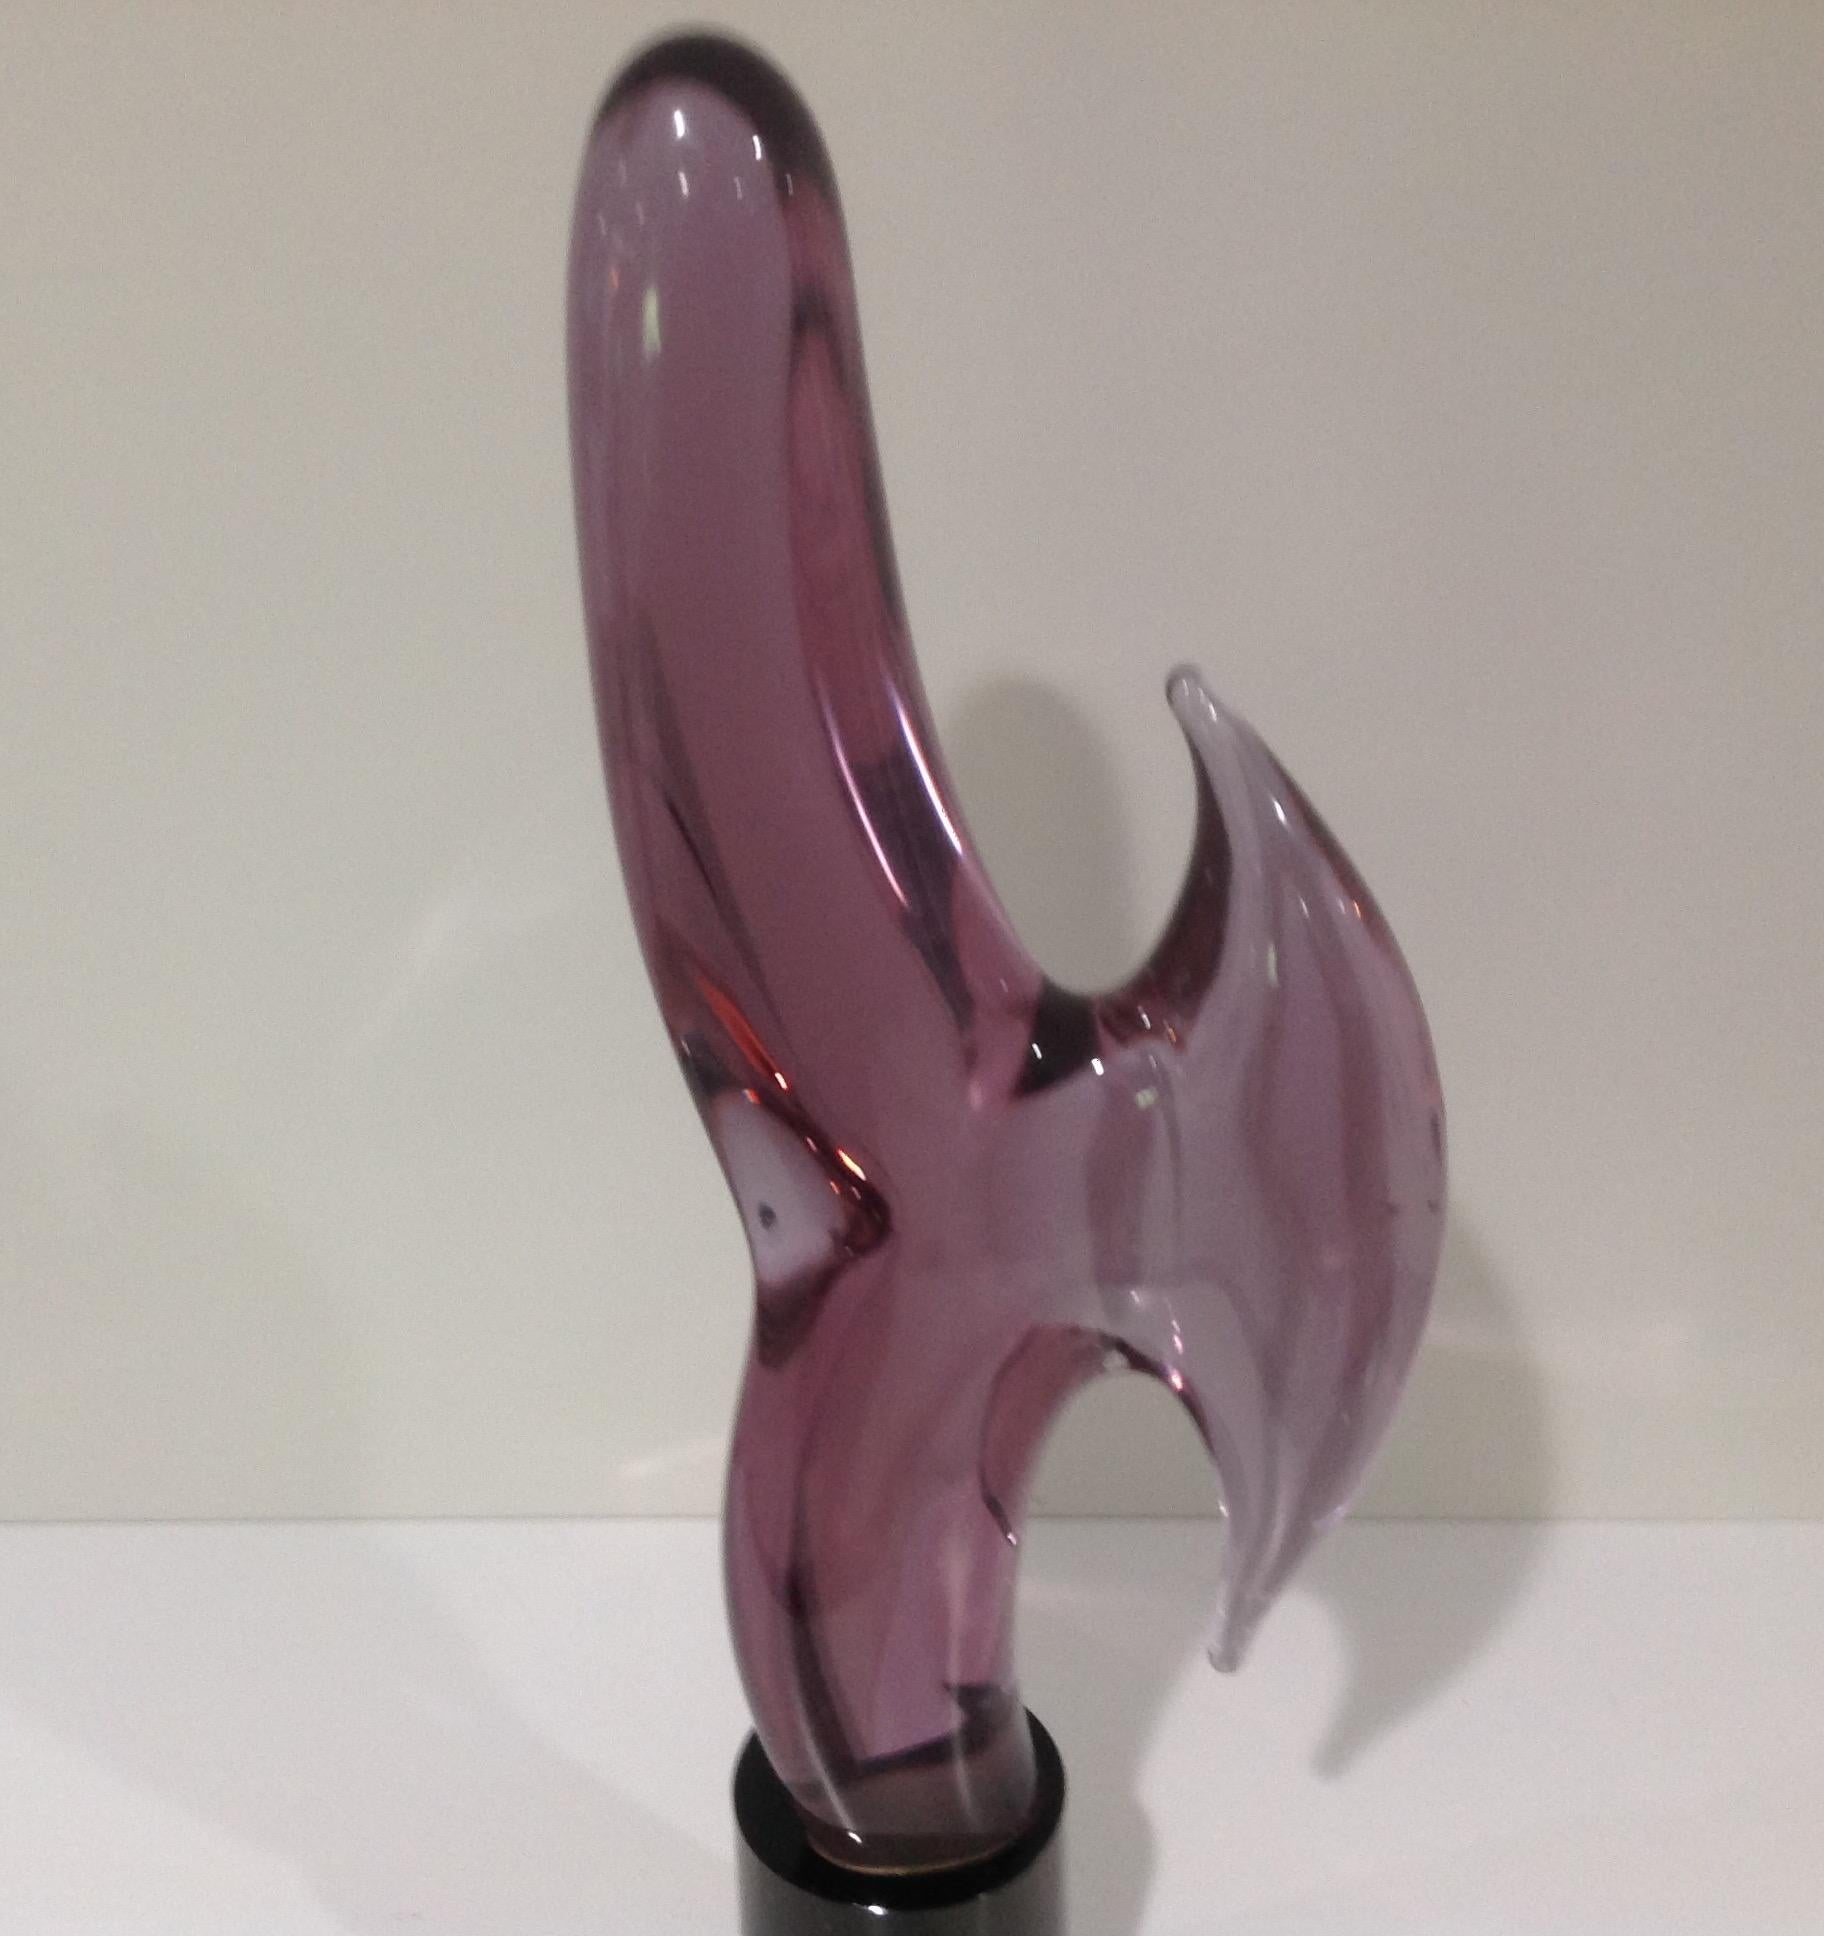 Modern abstract Murano glass sculpture by master glass blower Livio Seguso. Signed as shown.